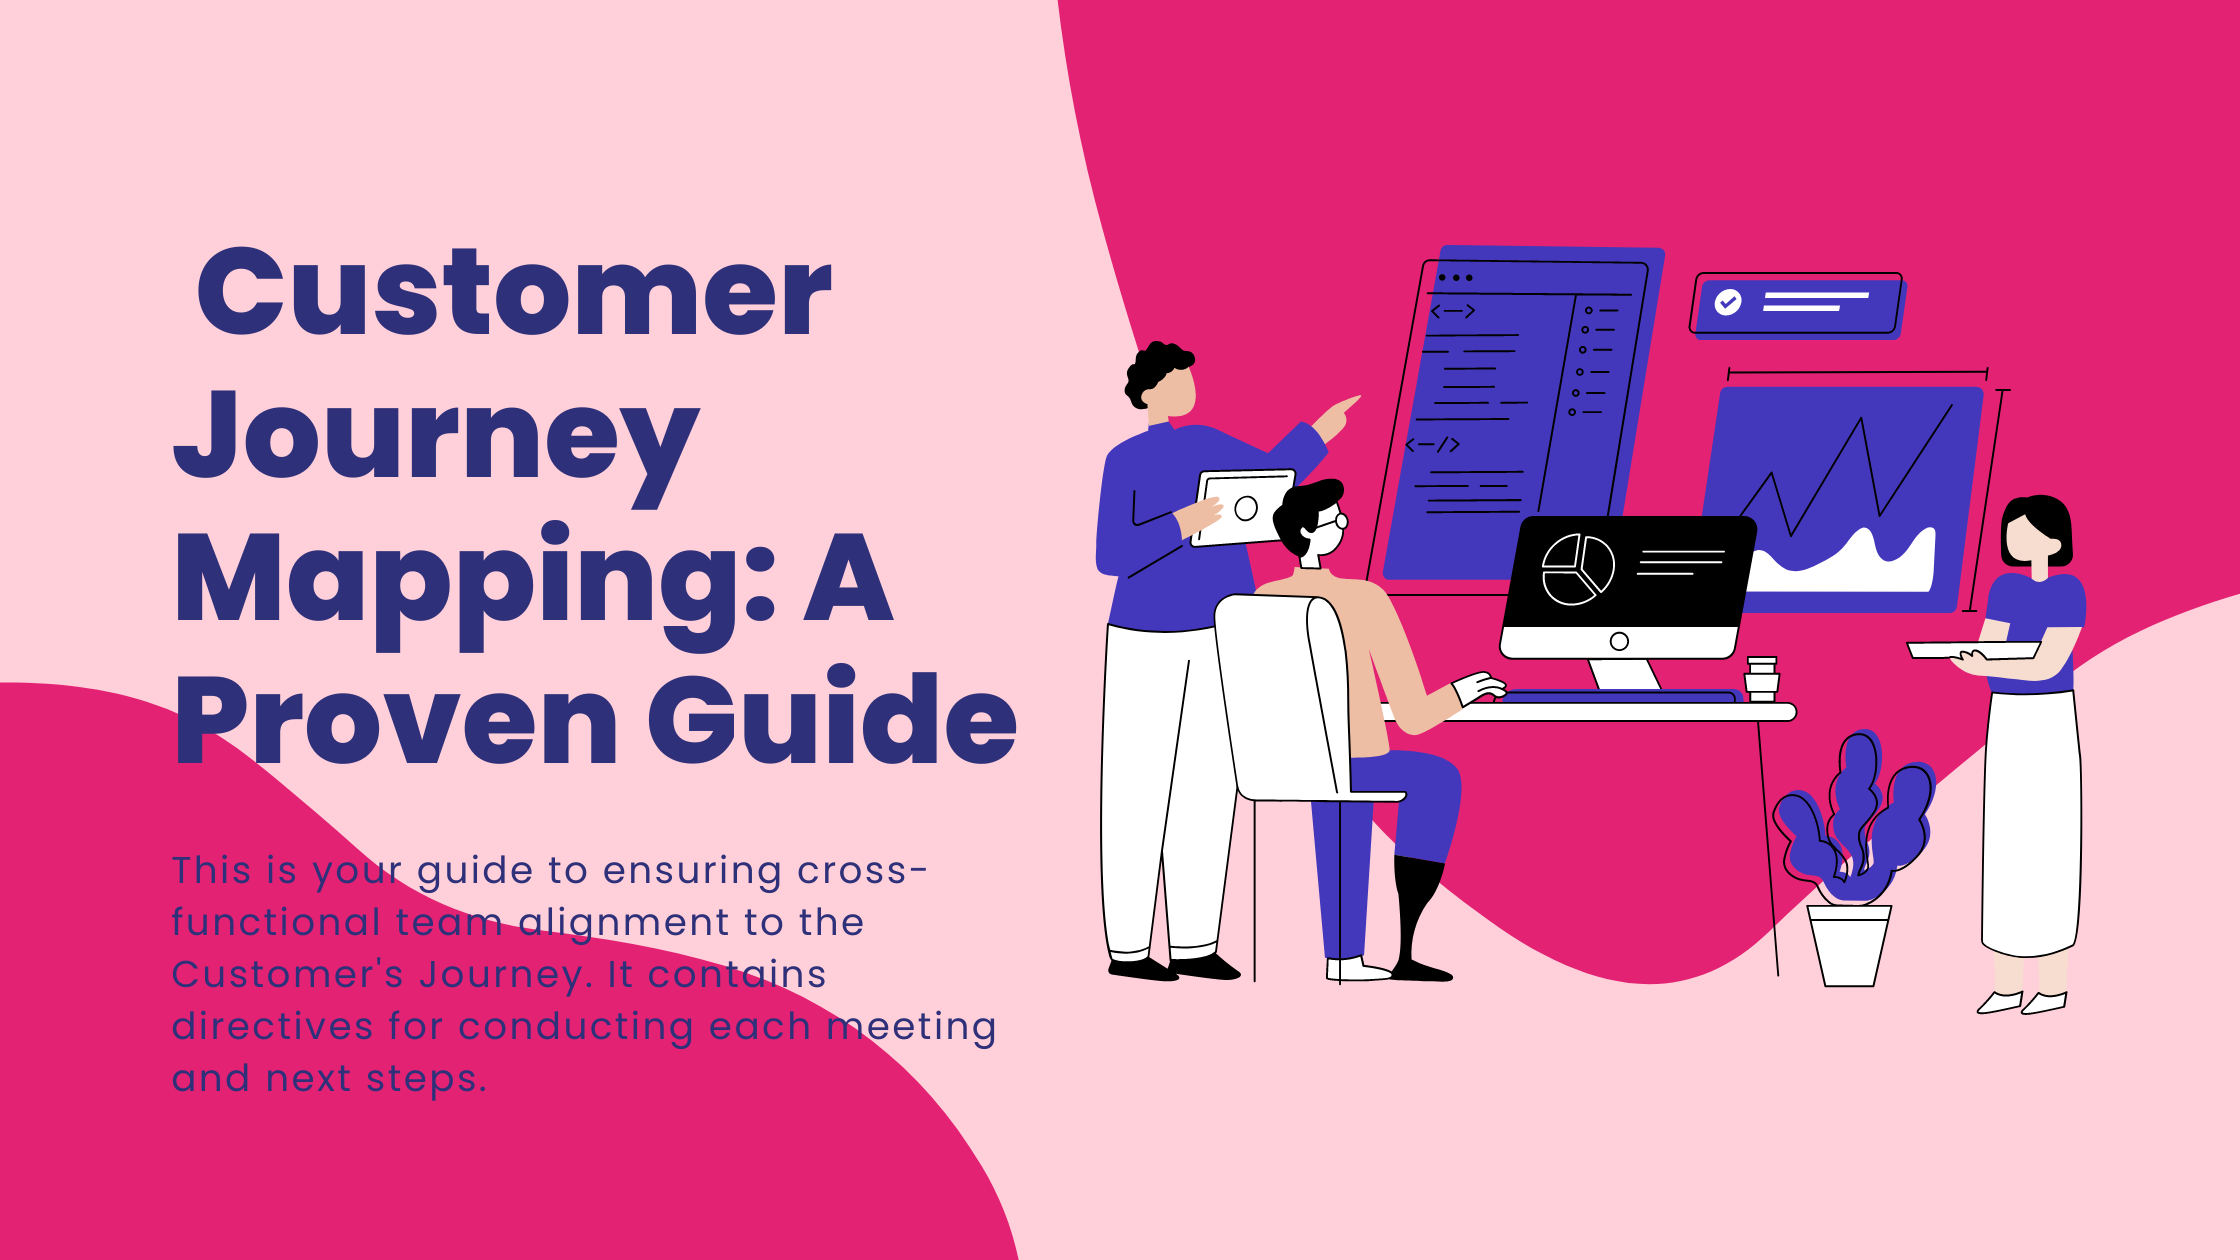 Blog post header: This is your guide to ensuring cross-functional team alignment to the Customer's Journey. It contains directives for conducting each meeting and next steps.